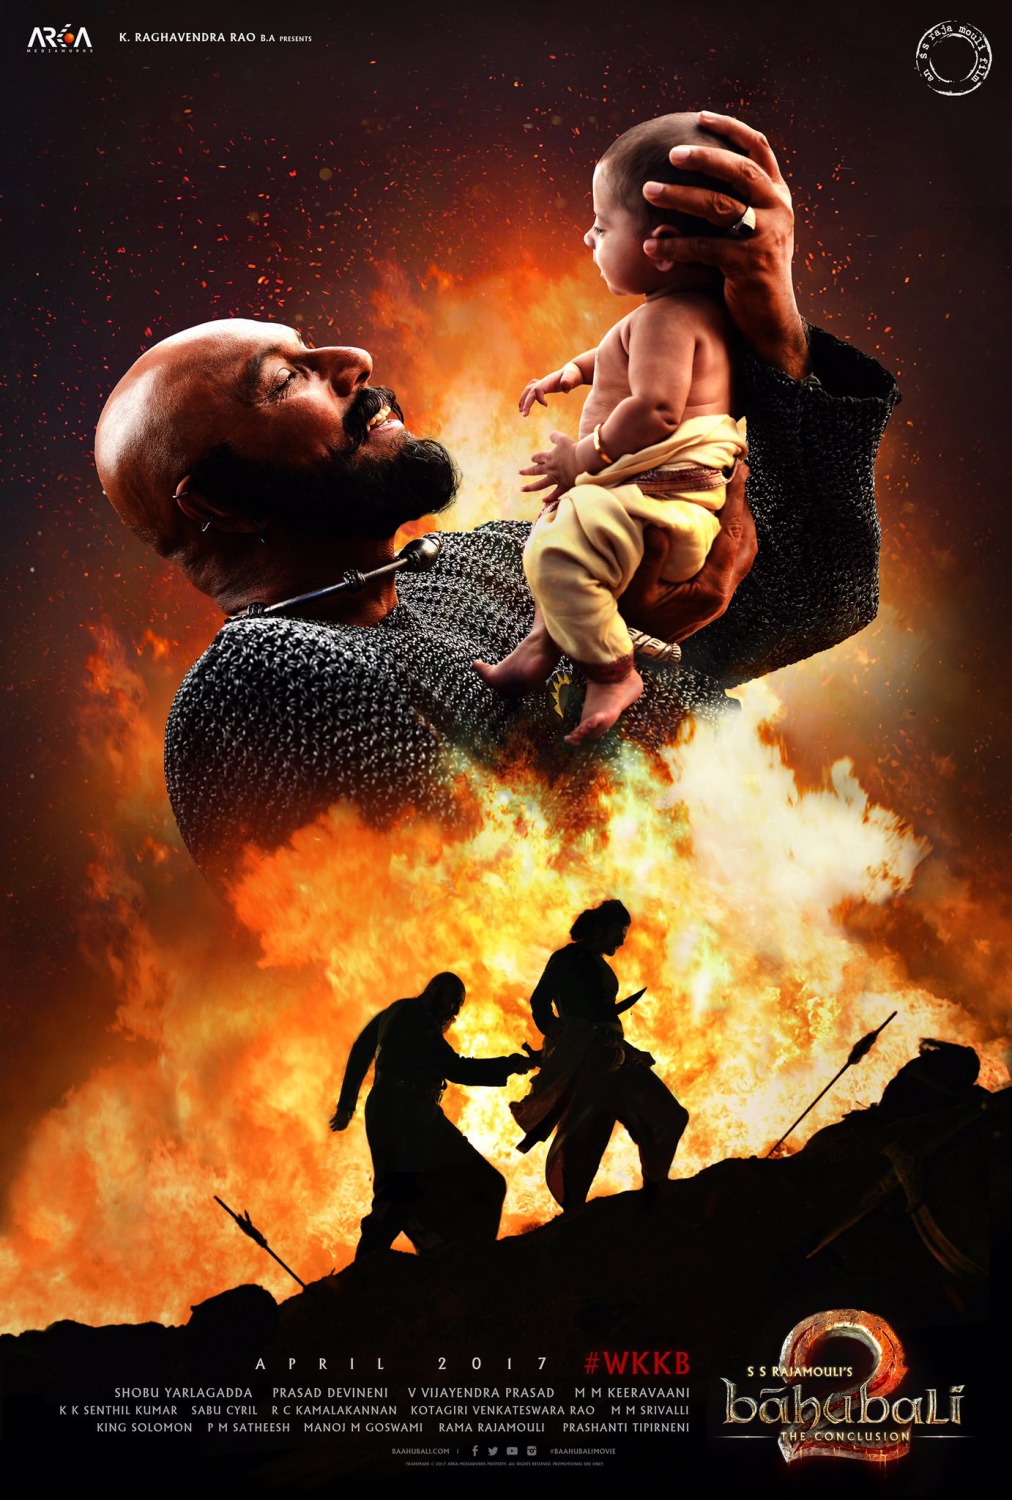 Extra Large Movie Poster Image for Baahubali 2: The Conclusion (#6 of 12)